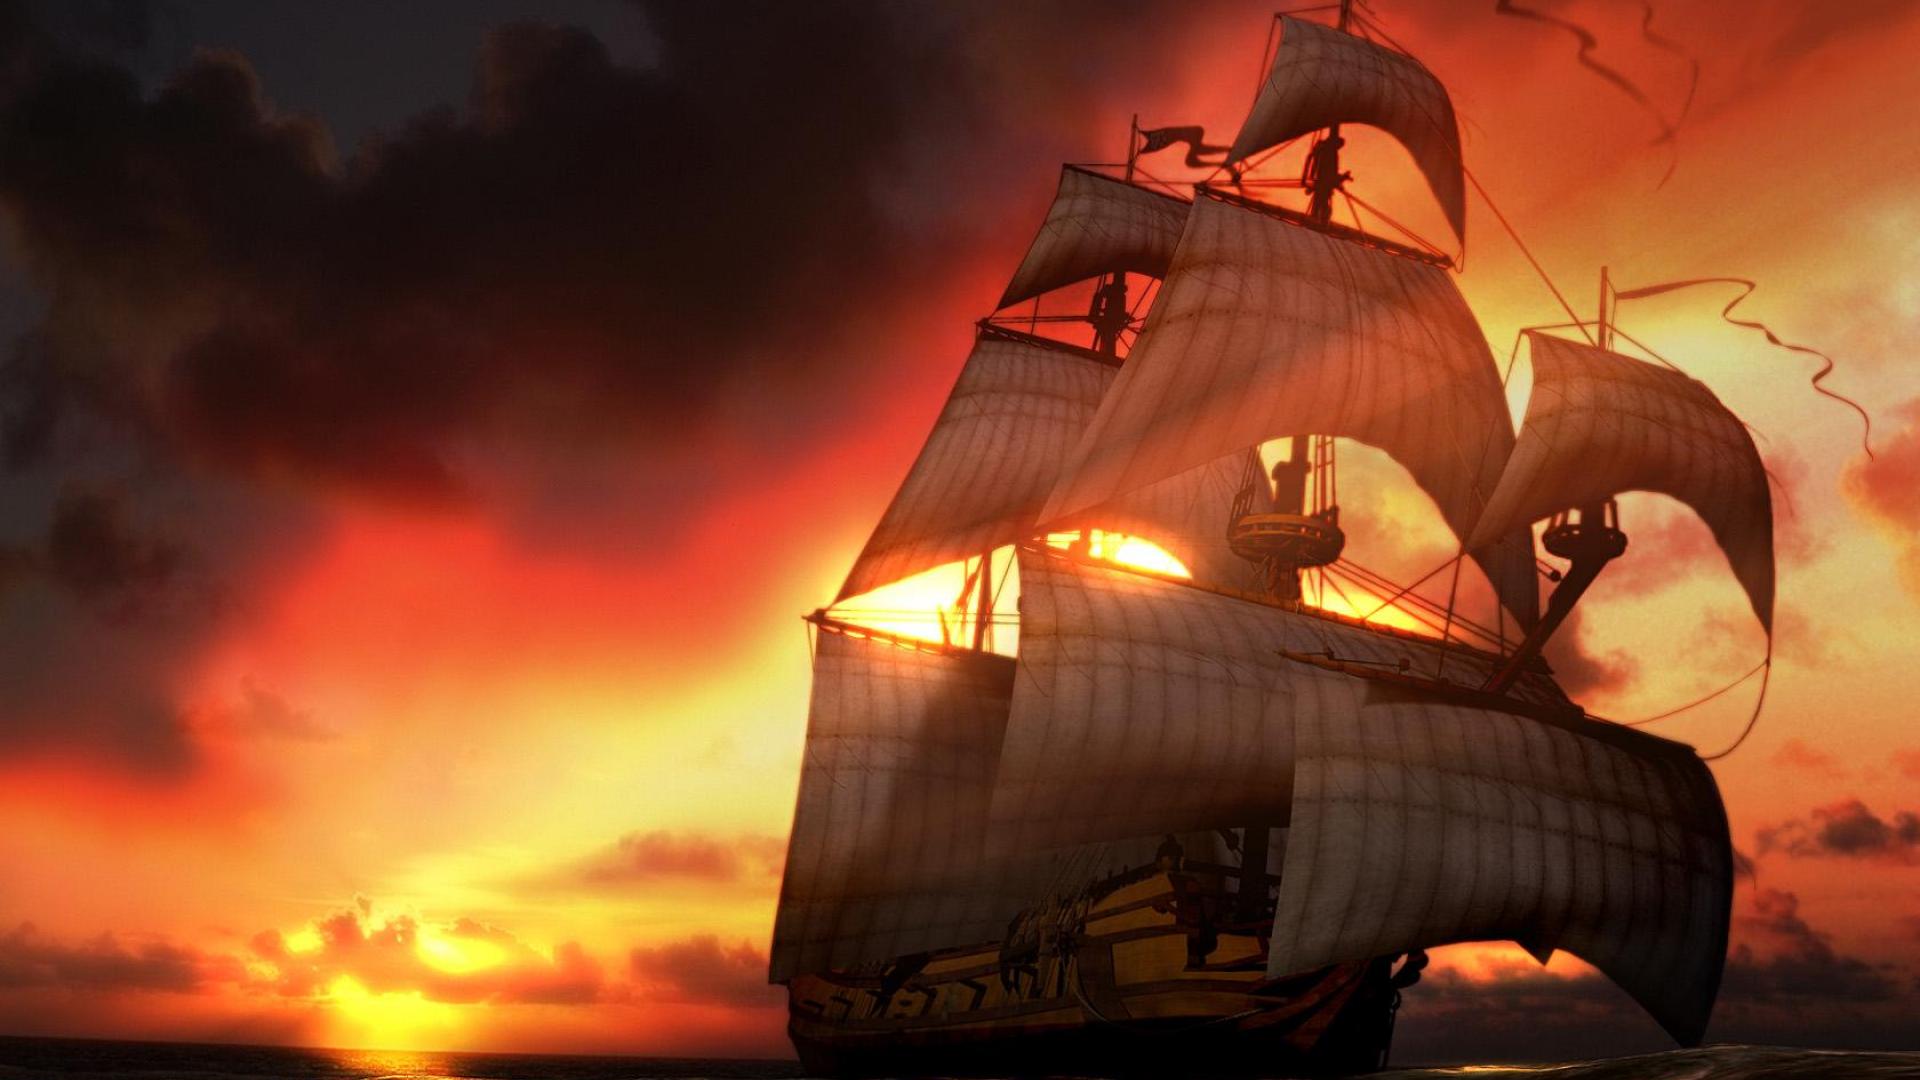 Pirates ship - (#57747) - High Quality and Resolution Wallpapers ...